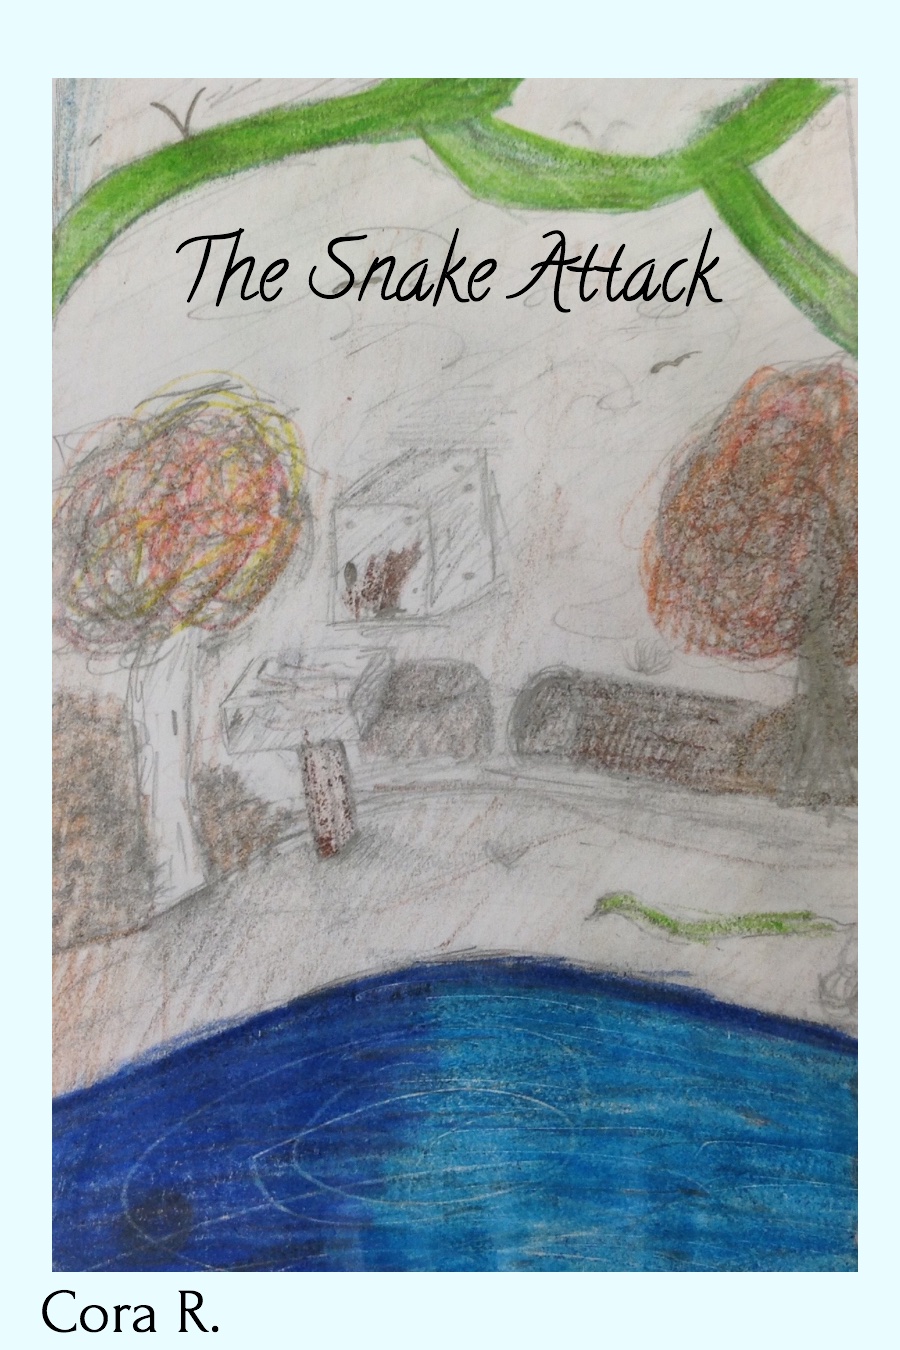 The Snake Attack by Cora R